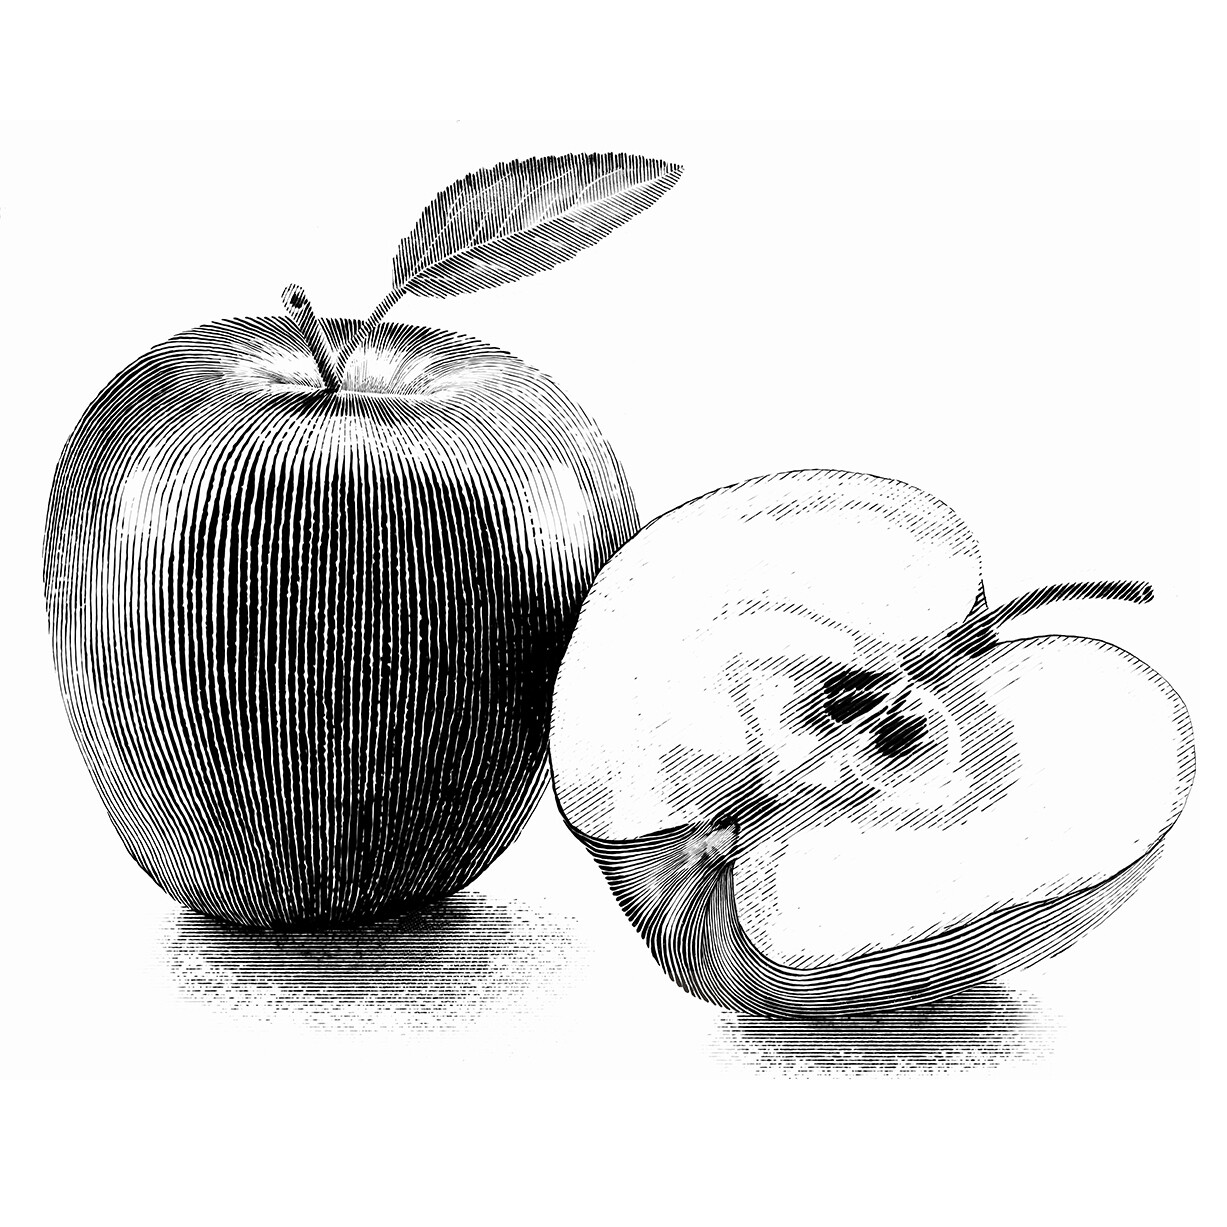 How to draw an apple with a pencil step-by-step drawing tutorial